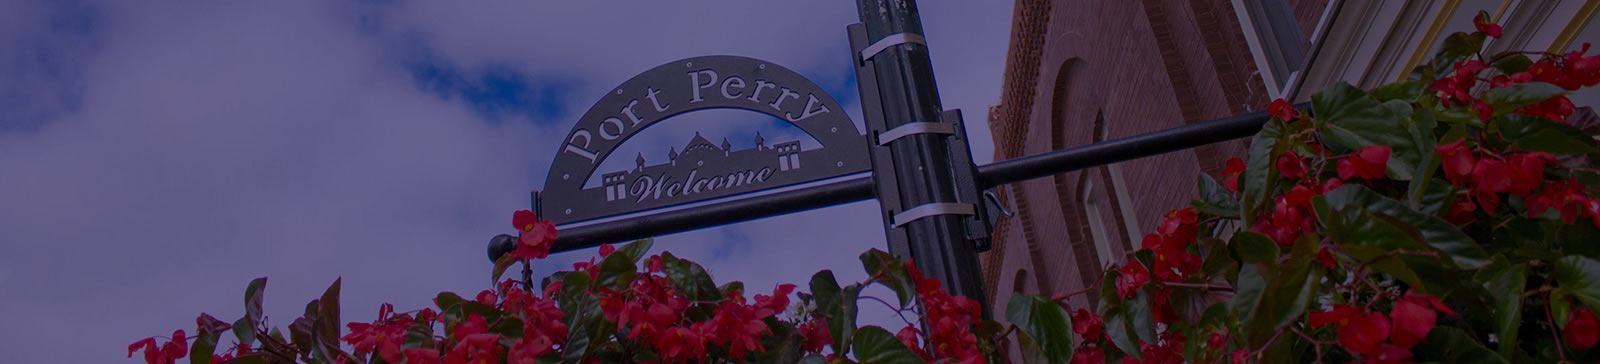 Port Perry welcome sign with hanging flower baskets.